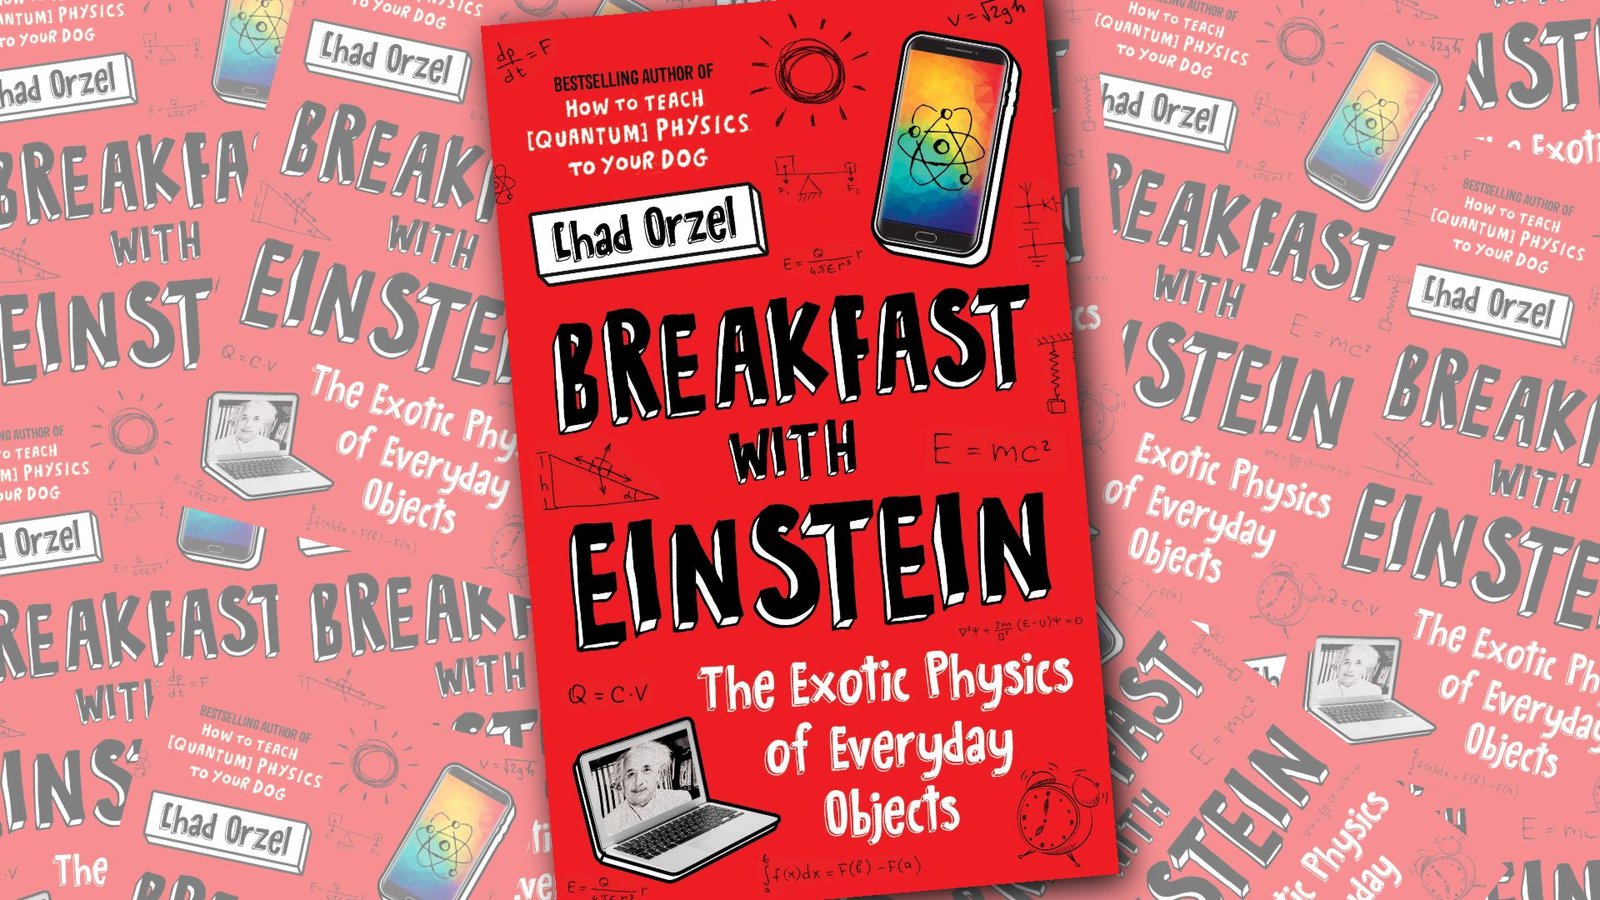 Breakfast with Einstein: The exotic physics of everyday objects